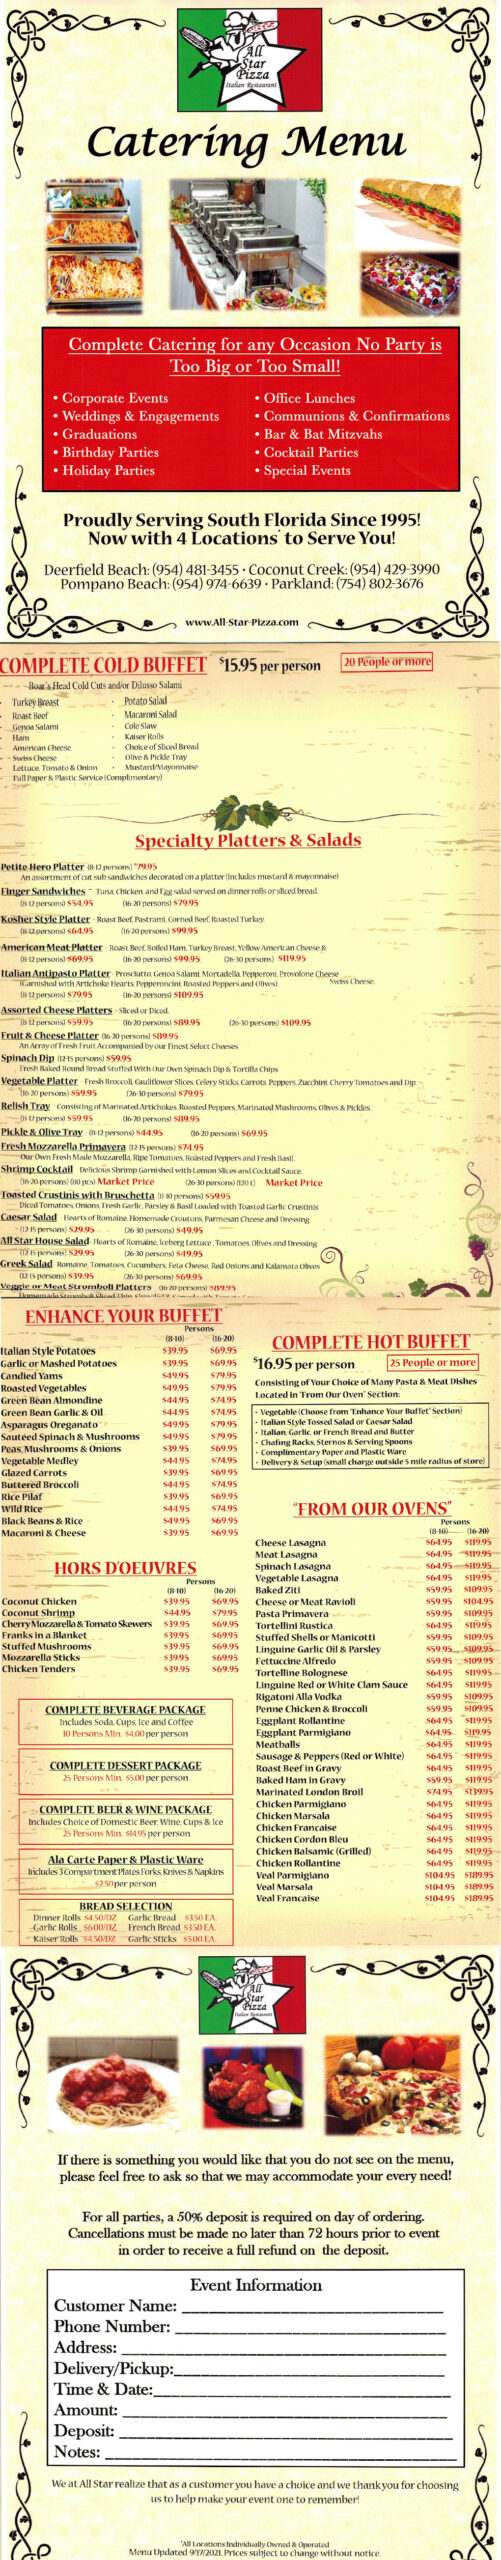 all-star-pizza-catering-menu-2